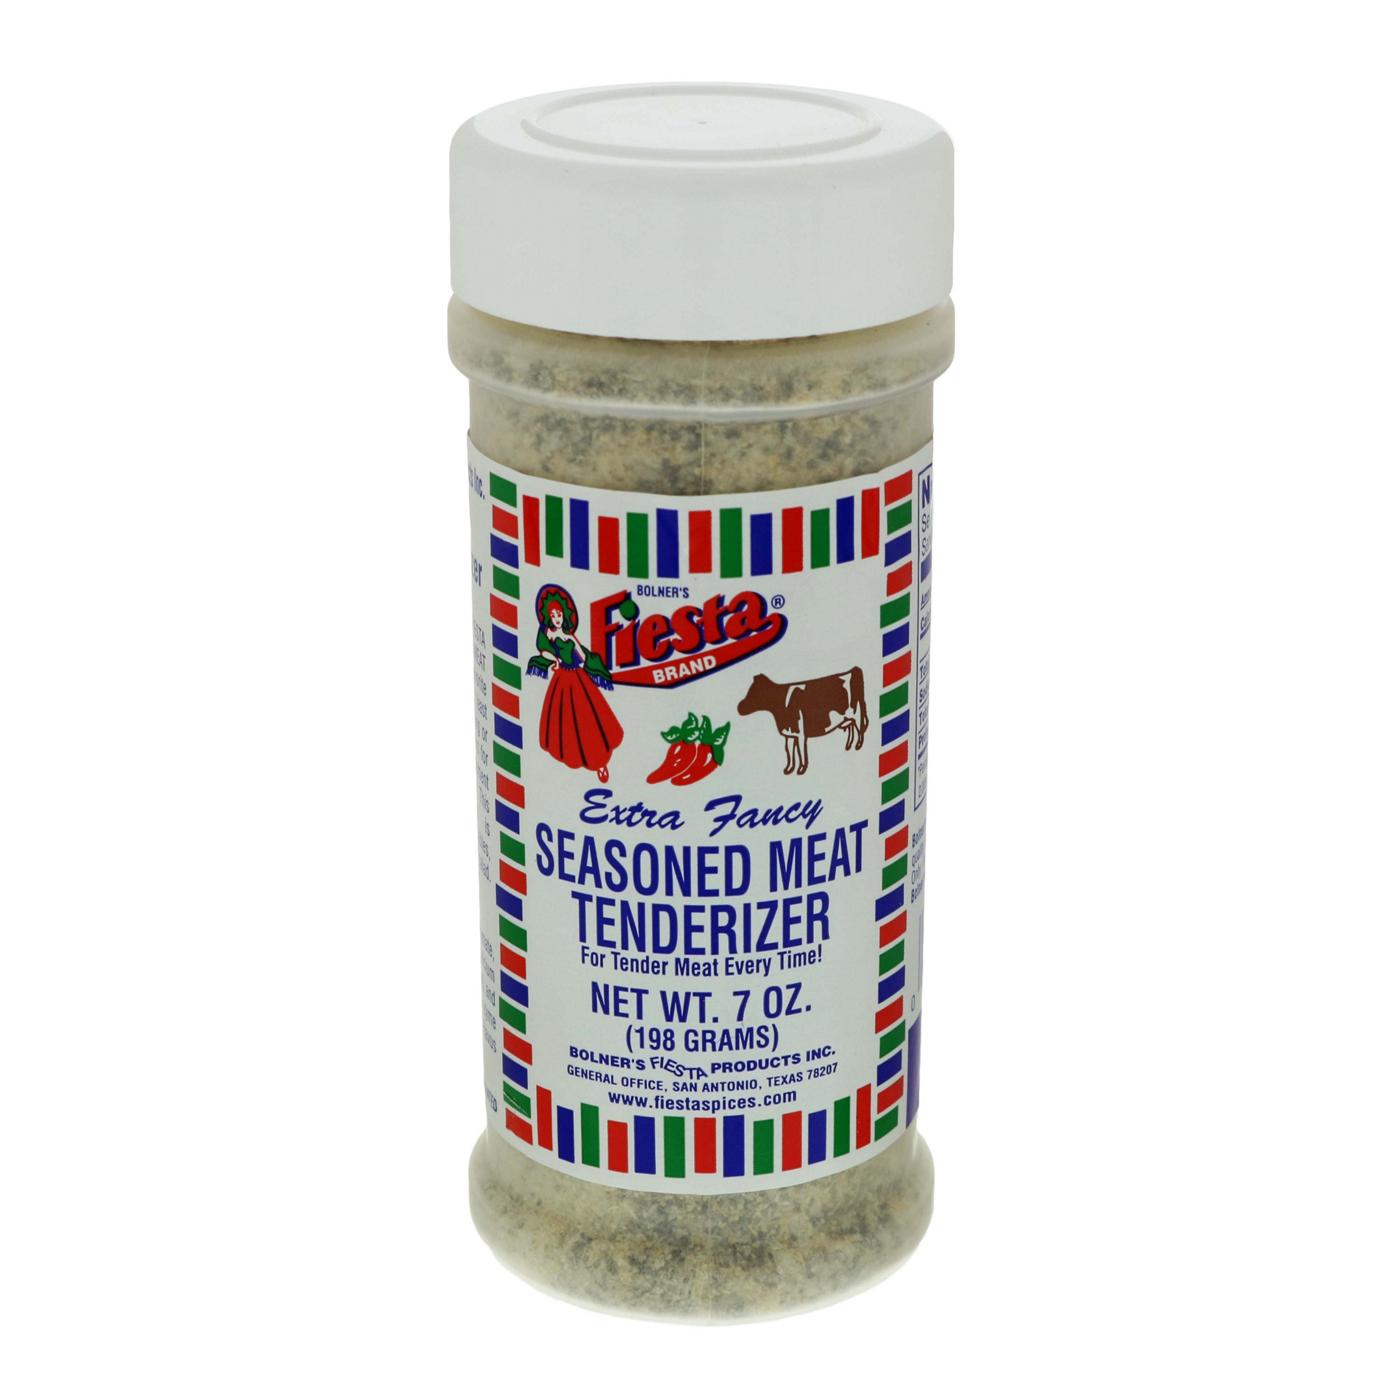 Bolner's Fiesta Seasoned Meat Tenderizer - Shop Herbs & Spices at H-E-B